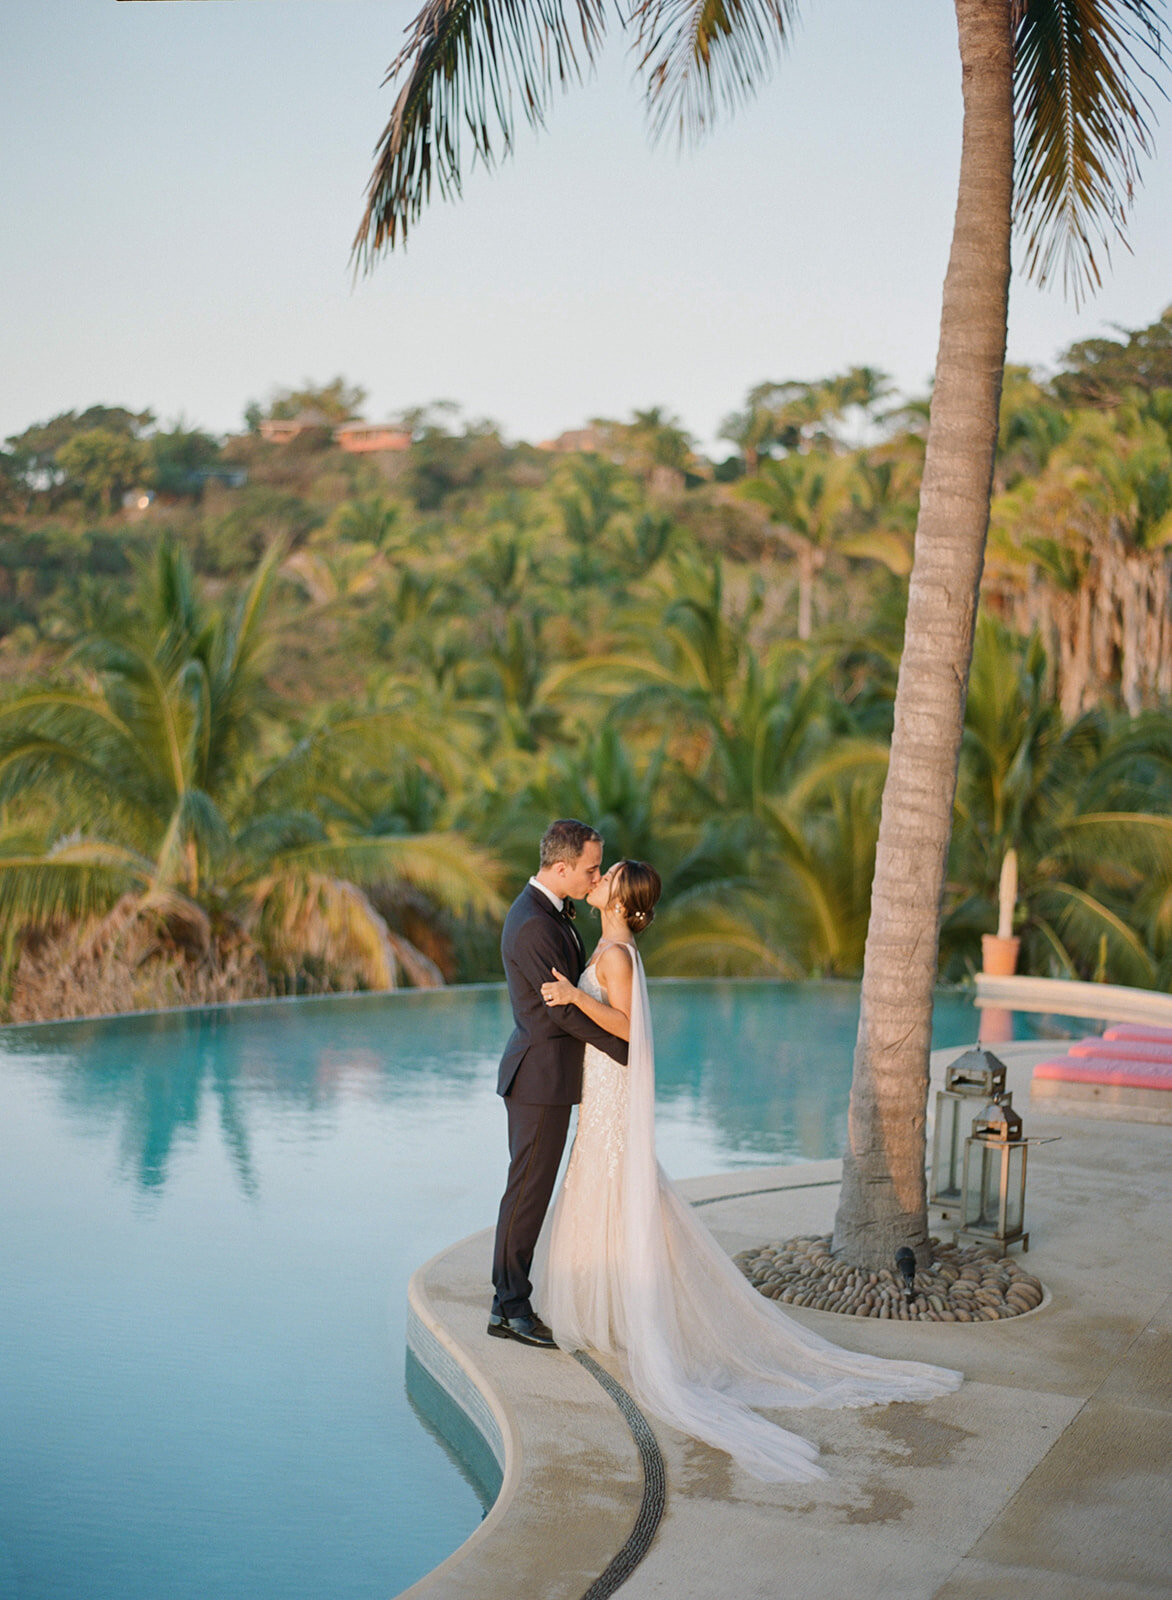 Couple's photos at One and Only Mandarina wedding